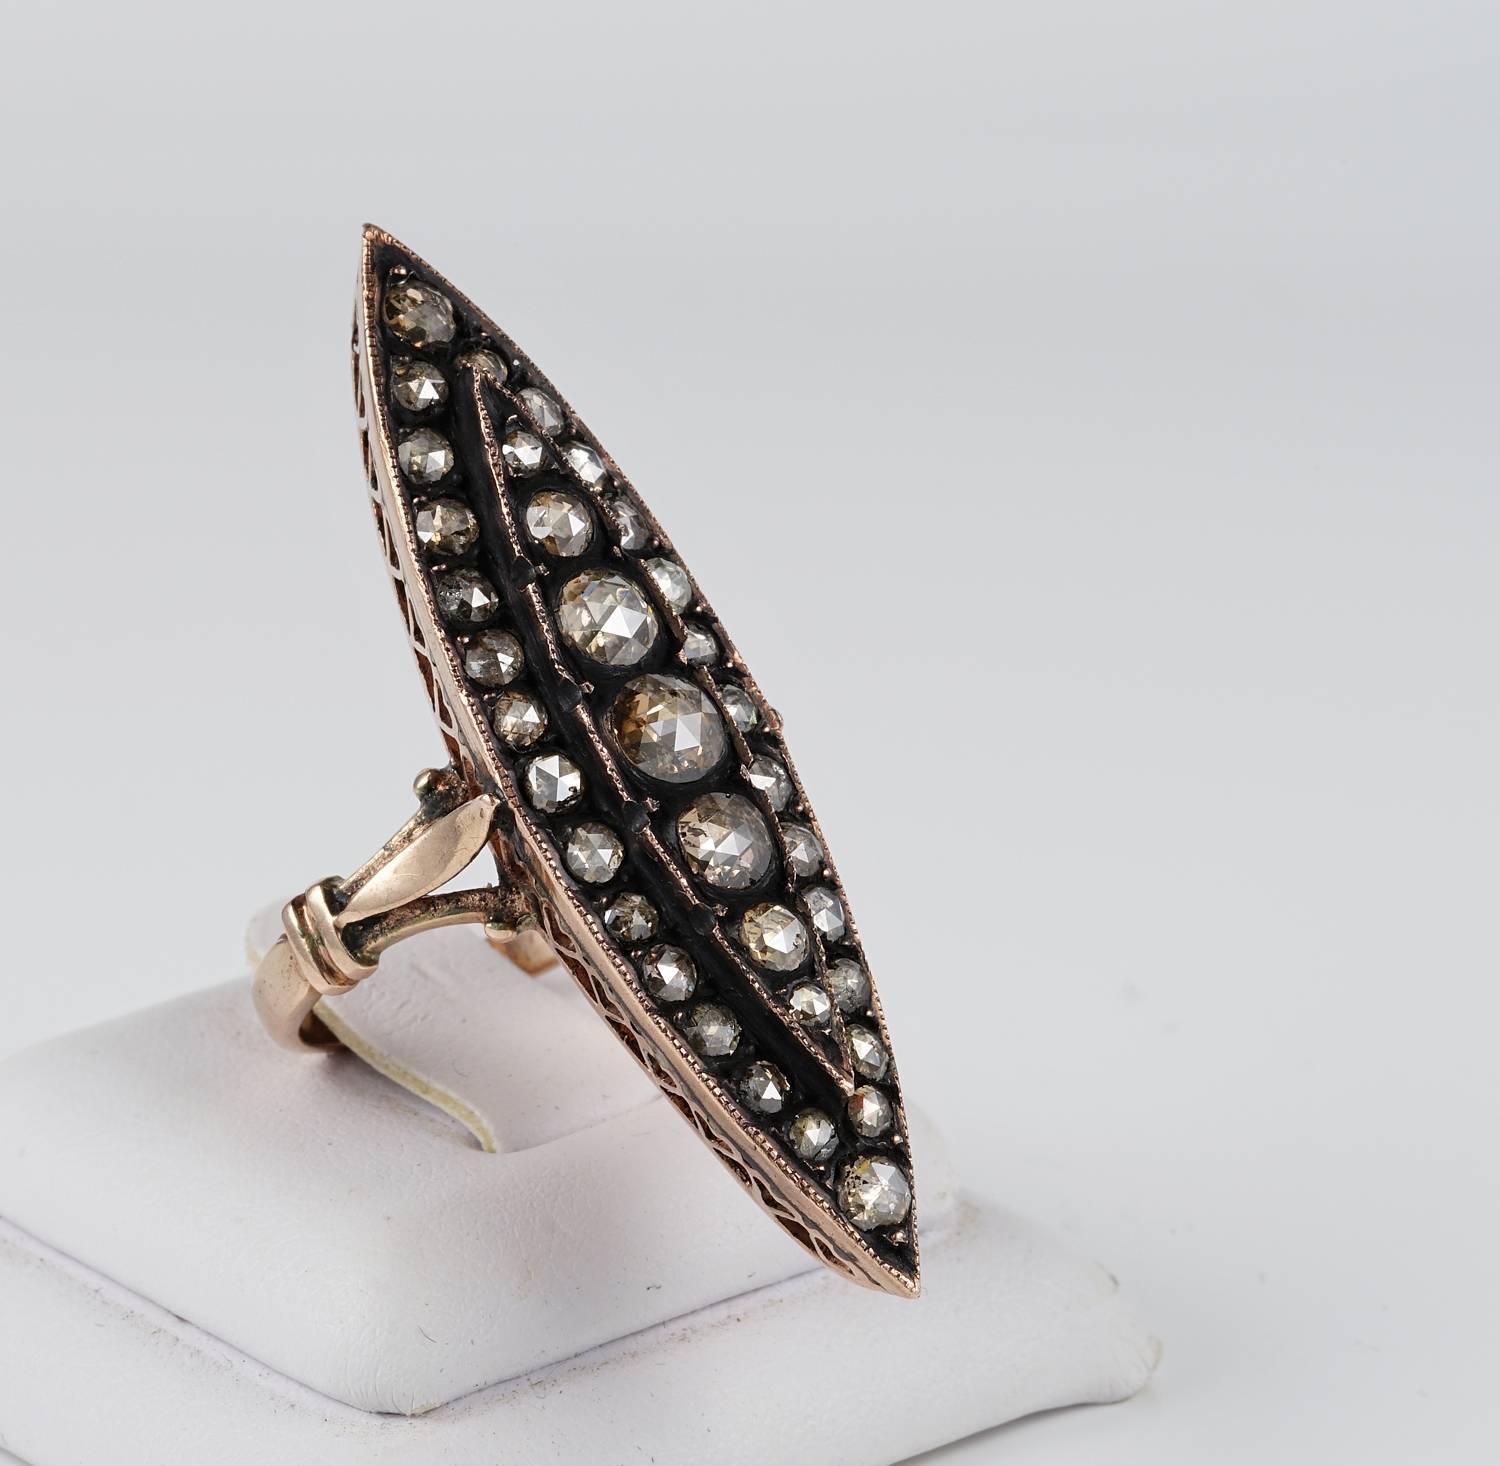 Magnificent, rare large scale navette ring from the Georgian period
Crafted of solid 15 Carat rose gold not marked
The ring is of outstanding beauty either in crafting than design boasting specatcular workmanship of the Georgian period
It boasts a